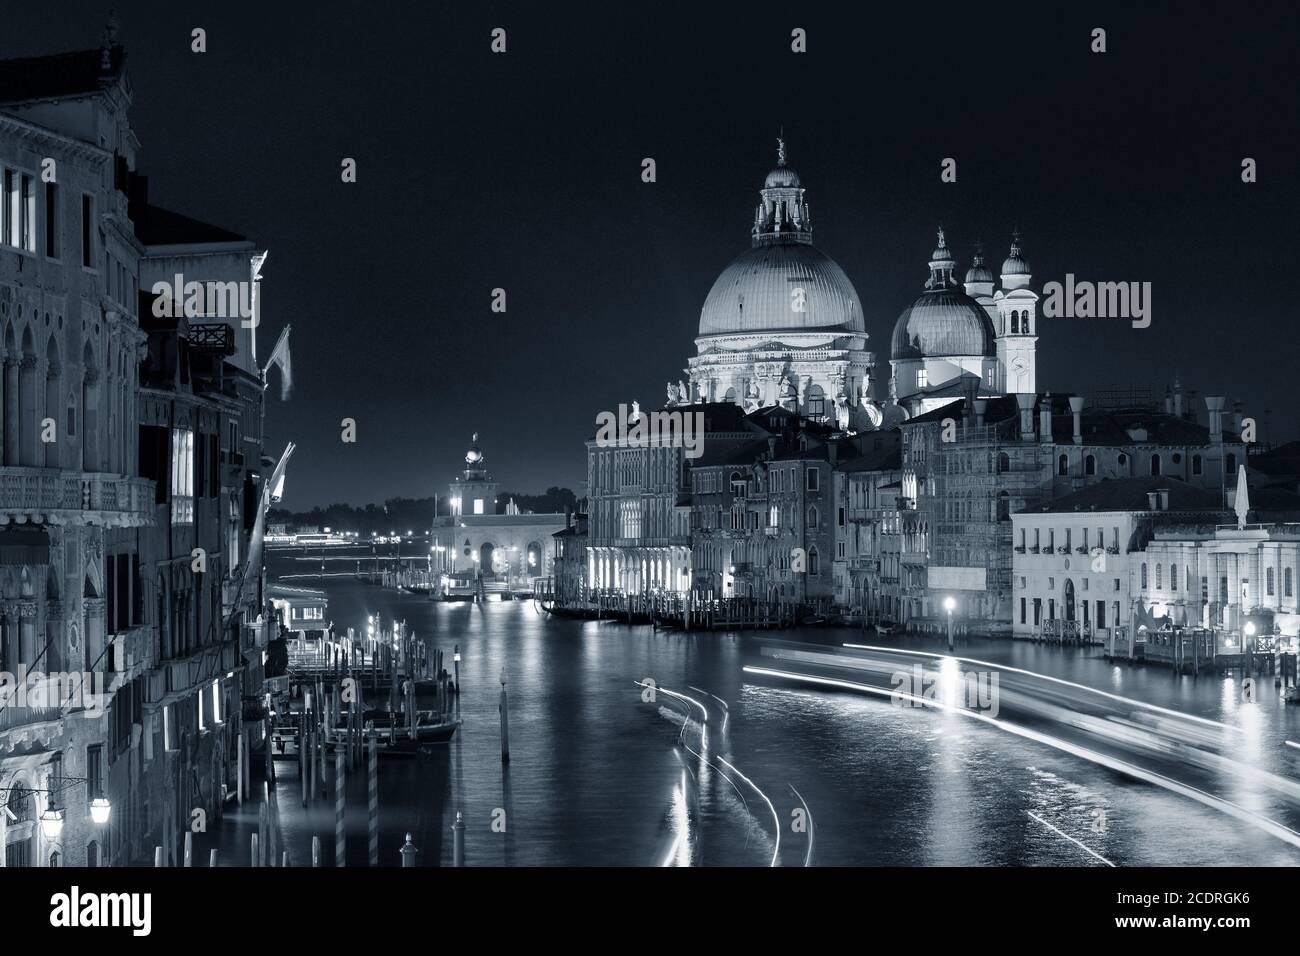 Busy Venice Grand Canal with light trails at night, Italy. Stock Photo